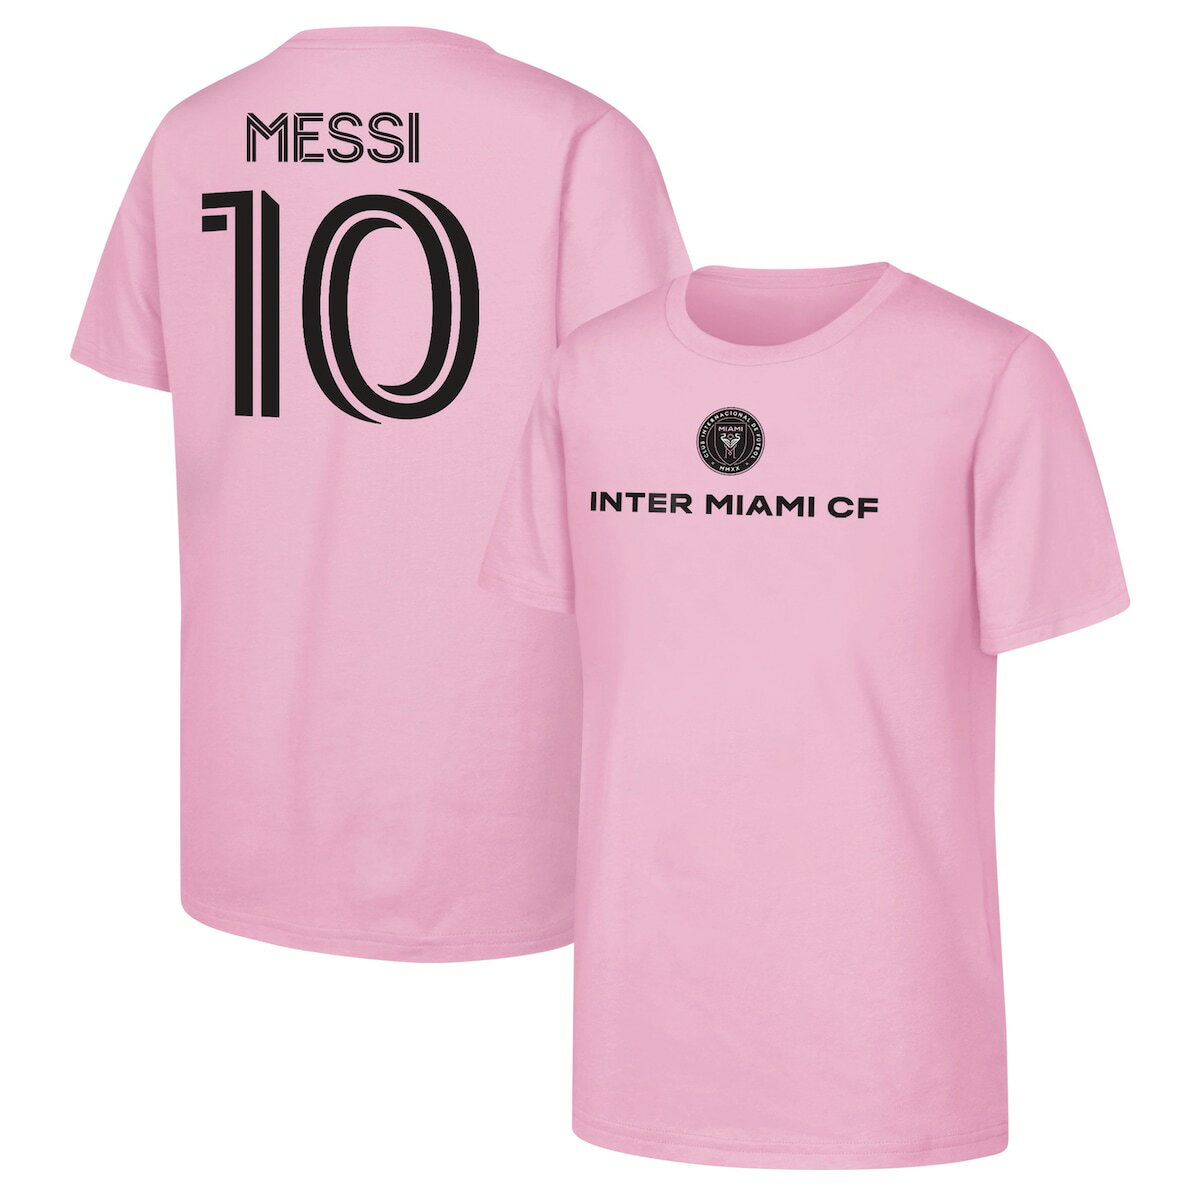 Featuring the name and number of the iconic Lionel Messi, this Inter Miami CF tee allows you to effortlessly showcase your appreciation for his talents. The cotton construction offers quality comfort, while the printed graphics highlight your status as a true Inter Miami CF supporter. This tee will instantly elevate your selection of team gear.Machine wash, tumble dry lowOfficially licensedShort sleeveMaterial: 100% CottonBrand: OuterstuffCrew neckScreen print graphicsImported